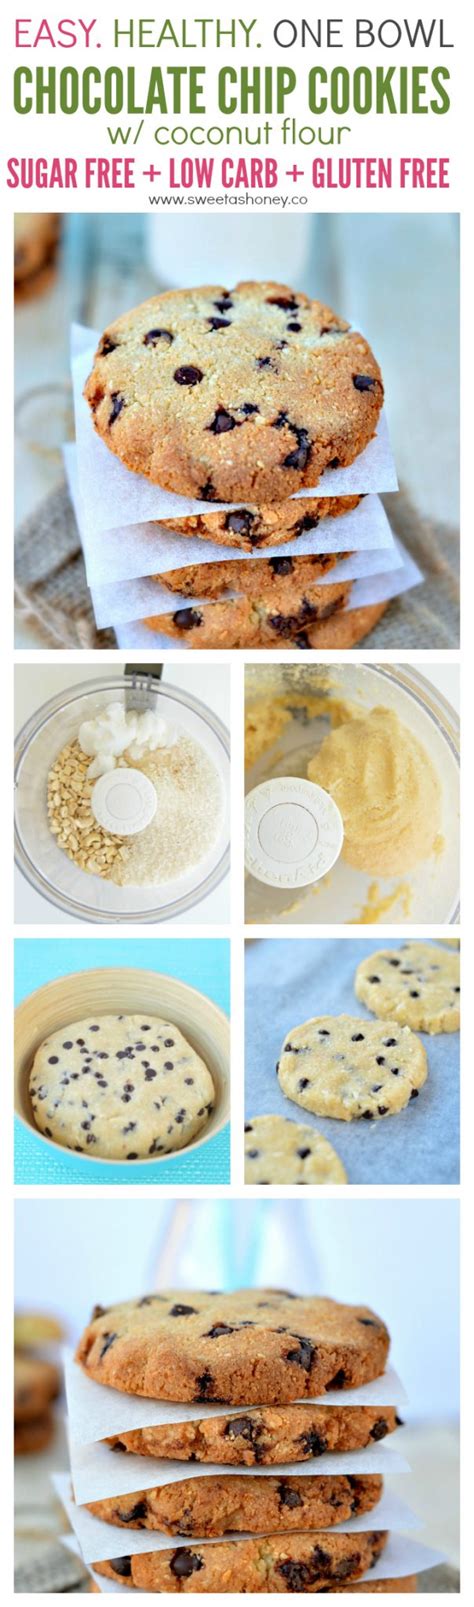 Sugar free oatmeal cookies are healthy oatmeal cookies with oats, flaxseed, bananas, coconut oil, dried fruit and no flour or sugar. Stevia Low Carb Cookie Recipes | Besto Blog